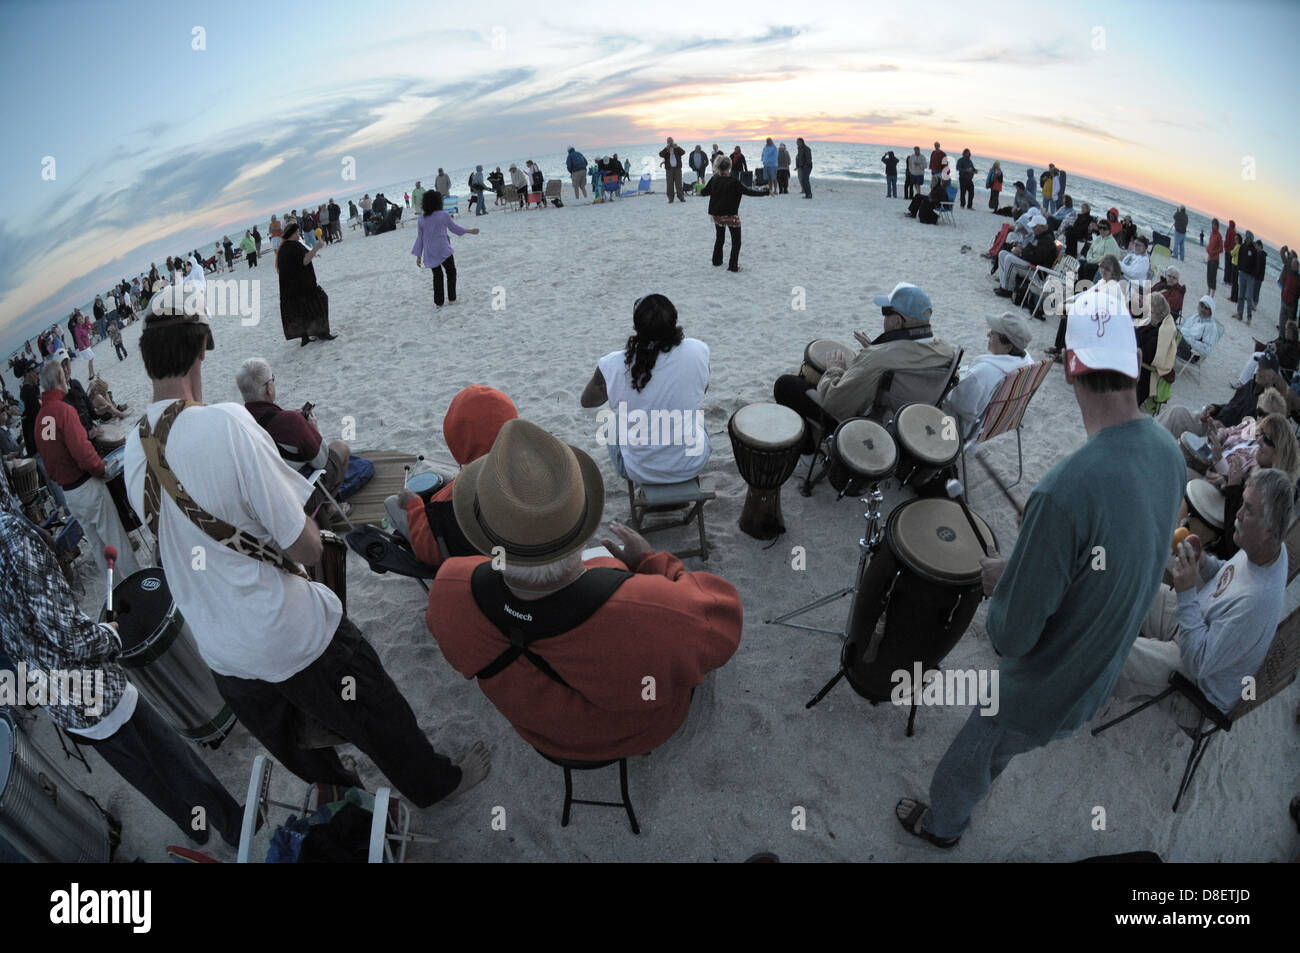 A group gathers on Nokomis, Florida beach to play drums as the sun sets as part of the drum circle. Stock Photo